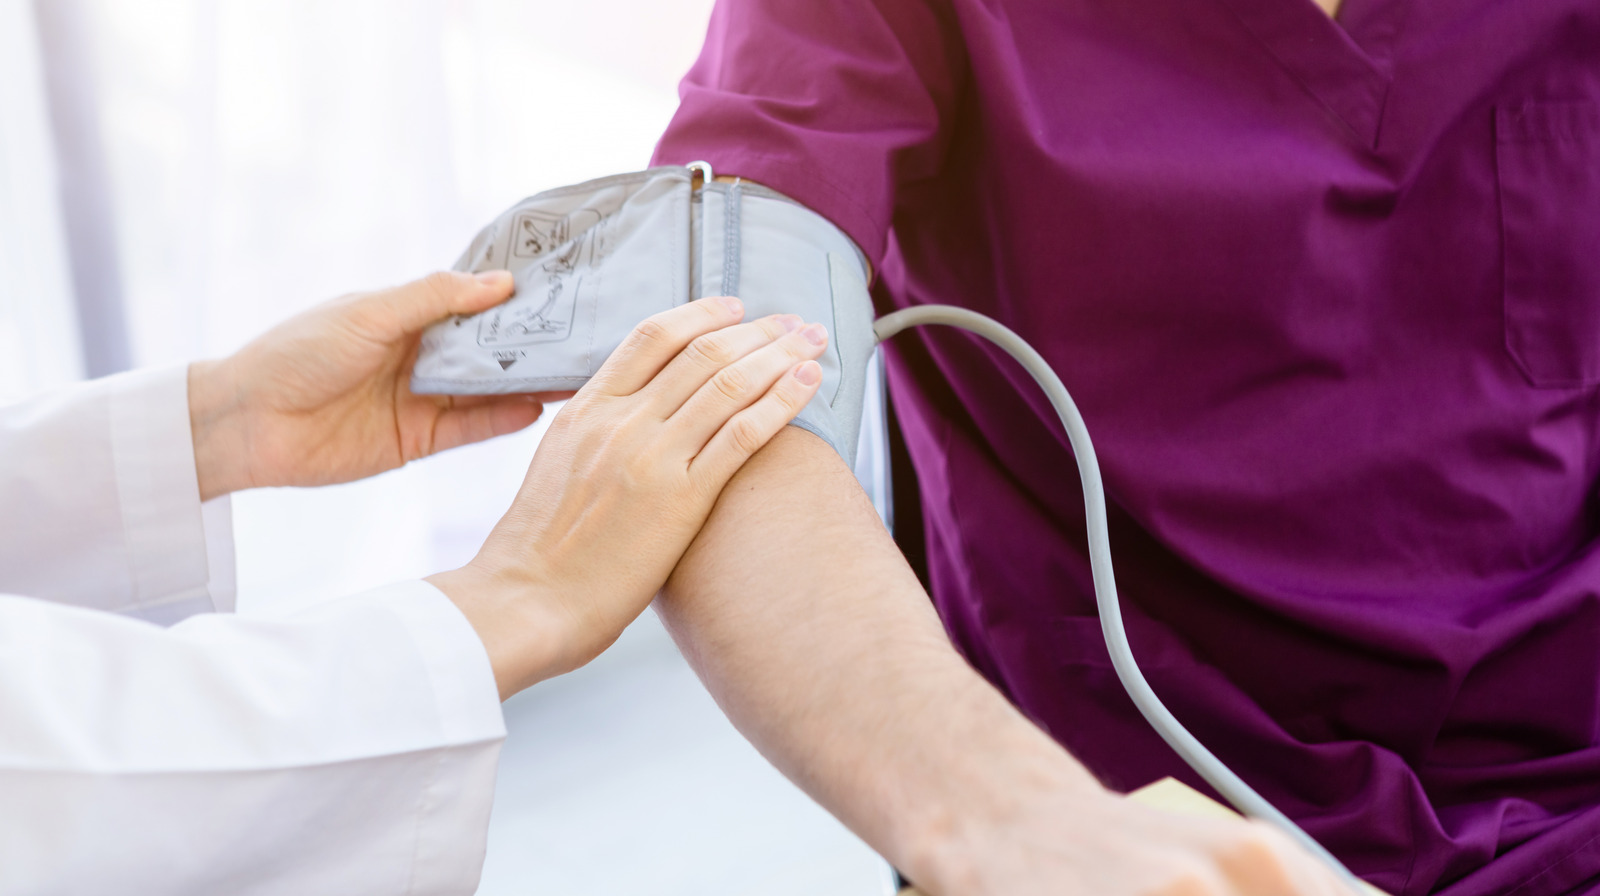 How To Lower Blood Pressure Without Medication